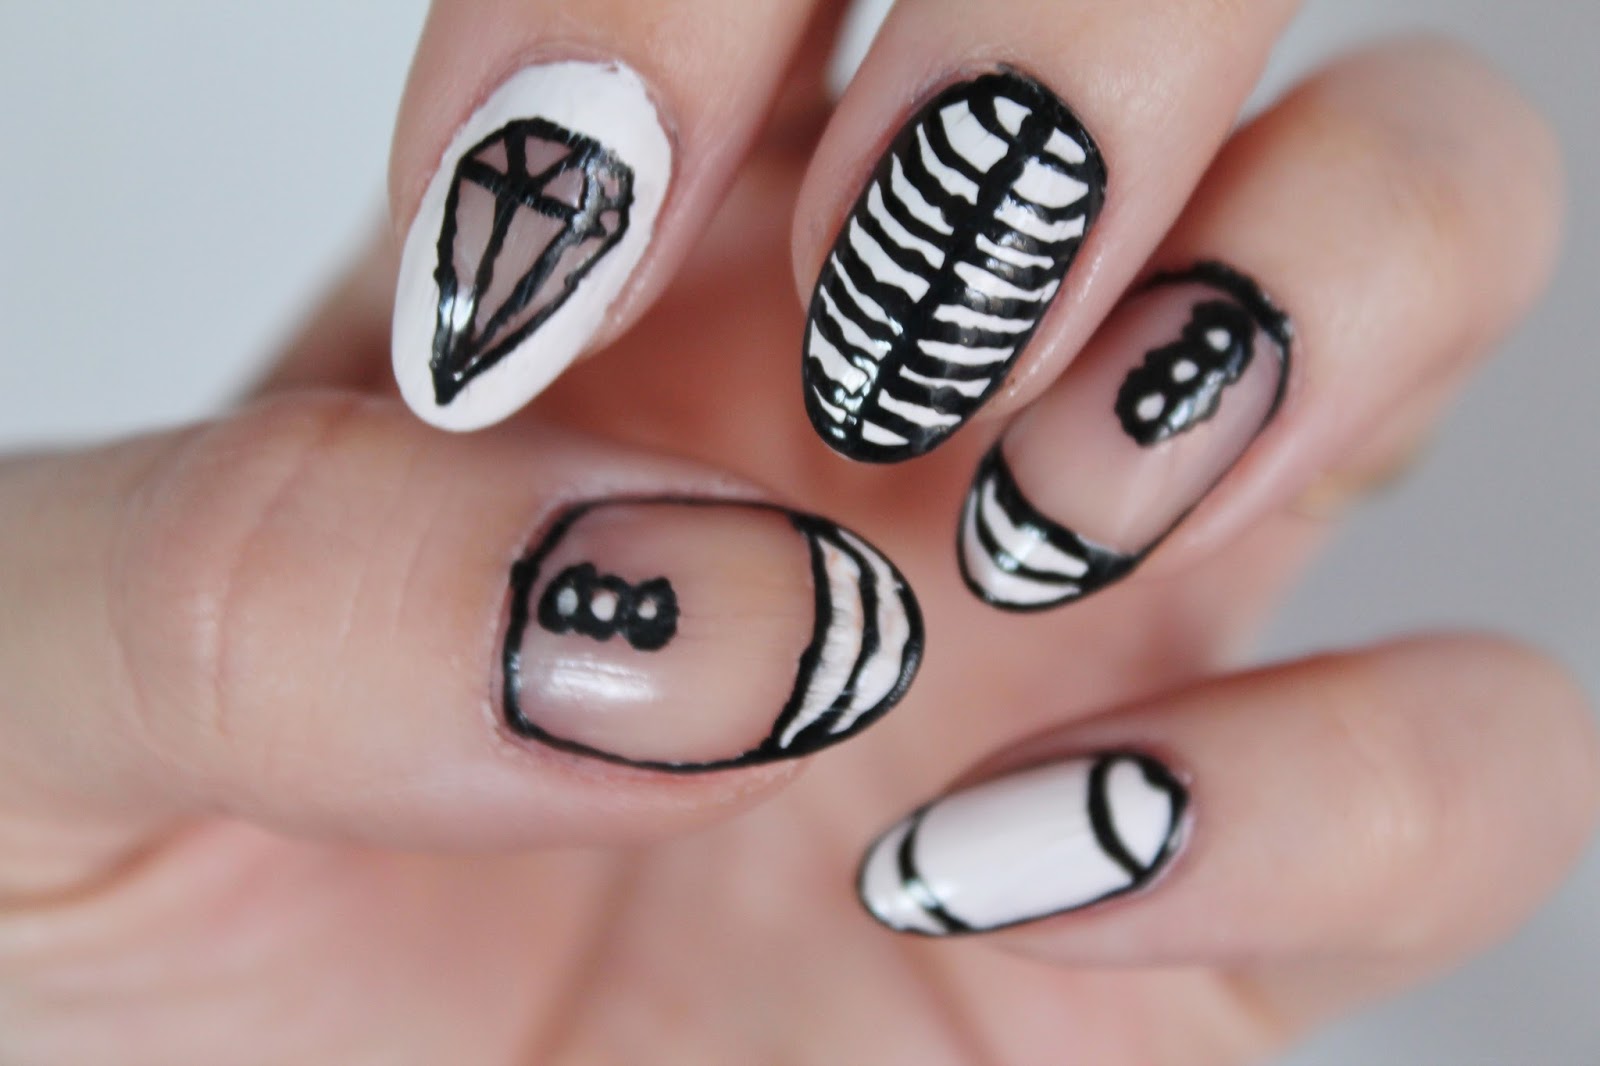 Single Line Nail Art with Negative Space - wide 7